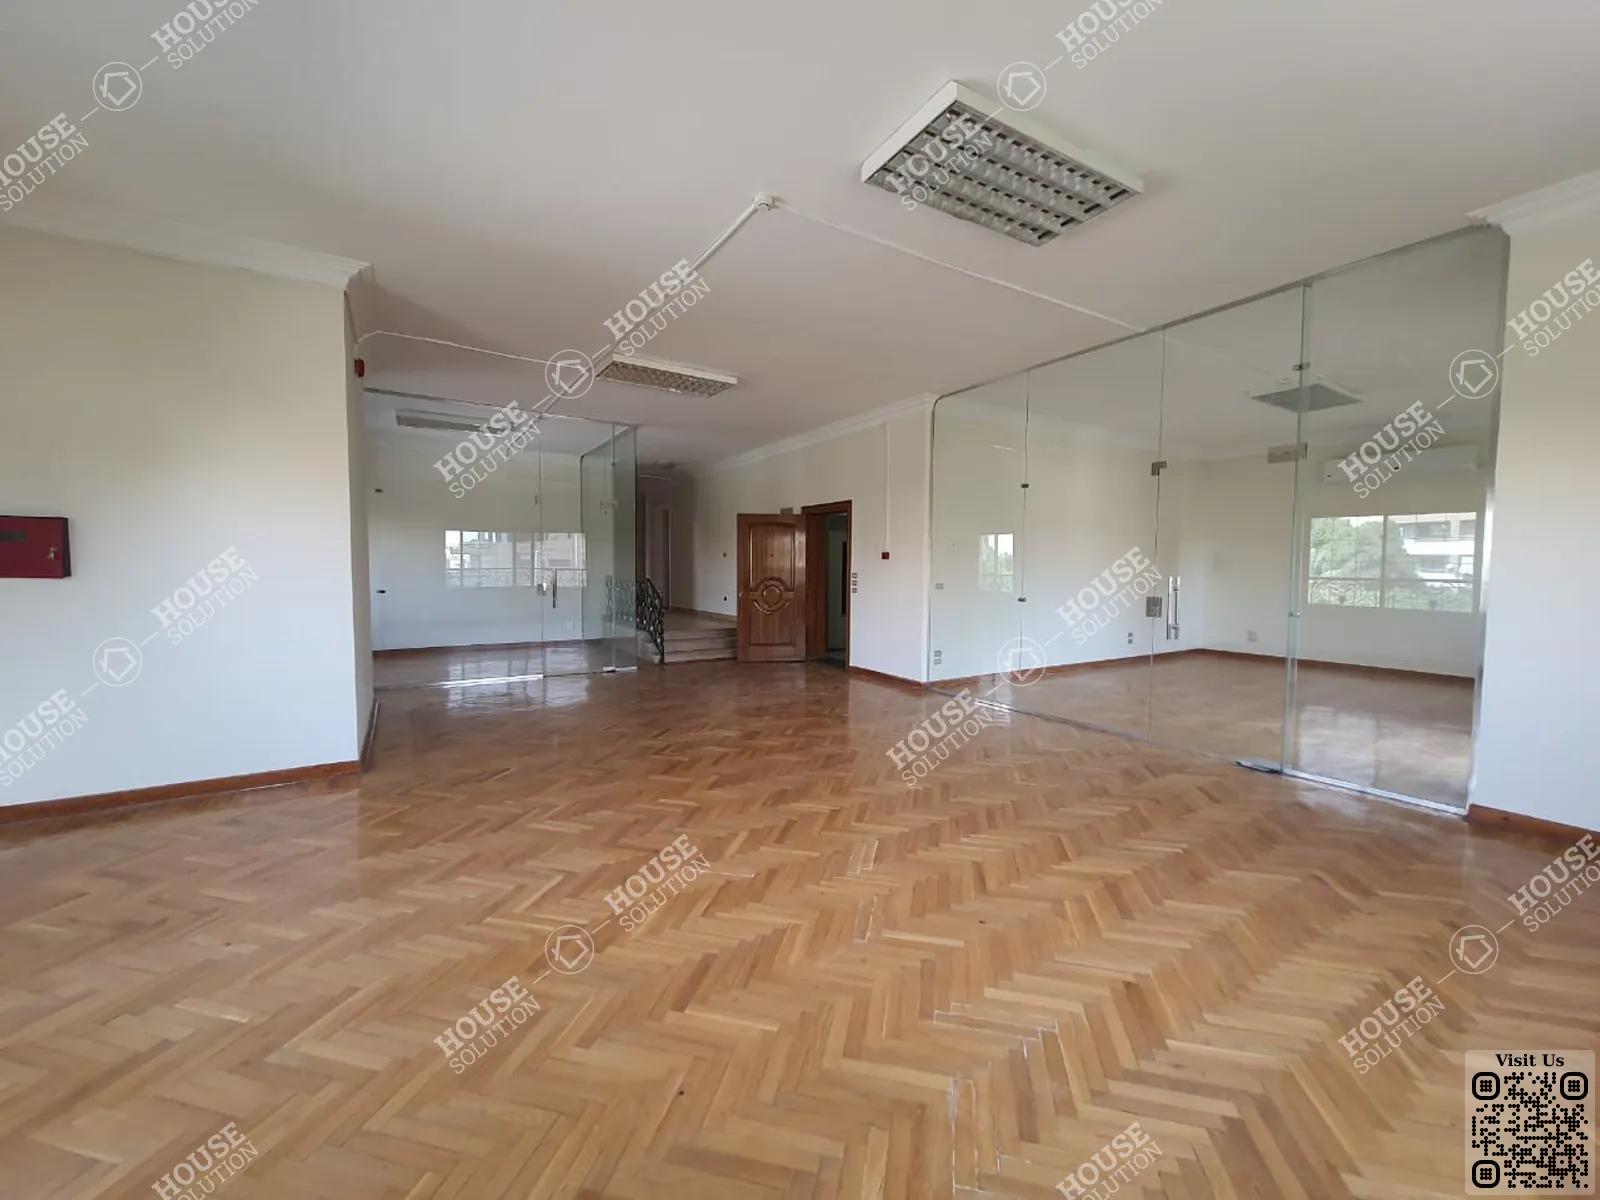 RECEPTION  @ Office spaces For Rent In Maadi Maadi Degla Area: 350 m² consists of 6 Bedrooms 4 Bathrooms Semi furnished 5 stars #5571-1